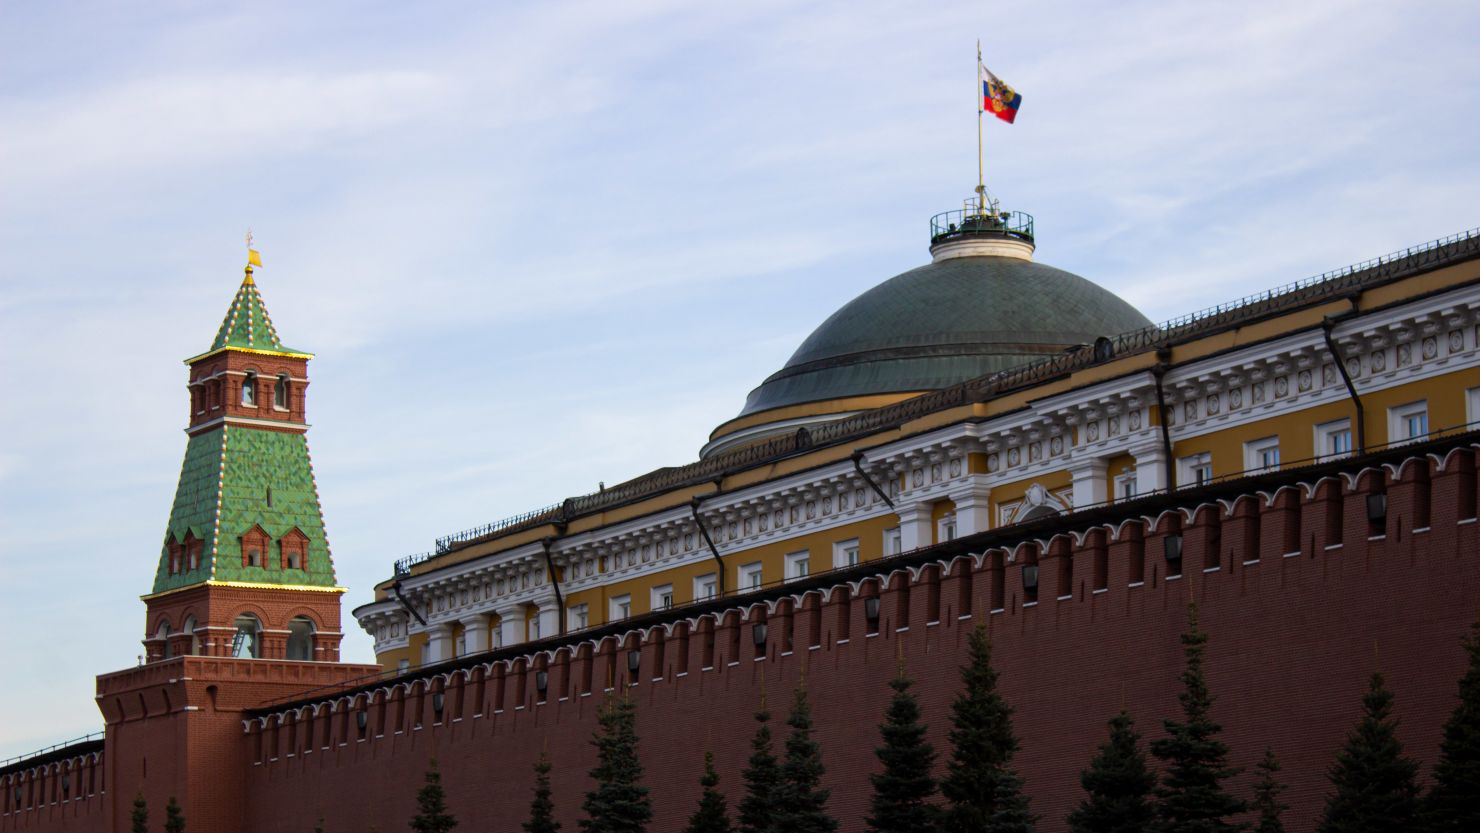 MOSCOW, RUSSIA - 2022/05/20: The Russian tricolor flag is seen on top of the Kremlin Senate located inside the Kremlin Wall. (Photo by Vlad Karkov/SOPA Images/LightRocket via Getty Images)